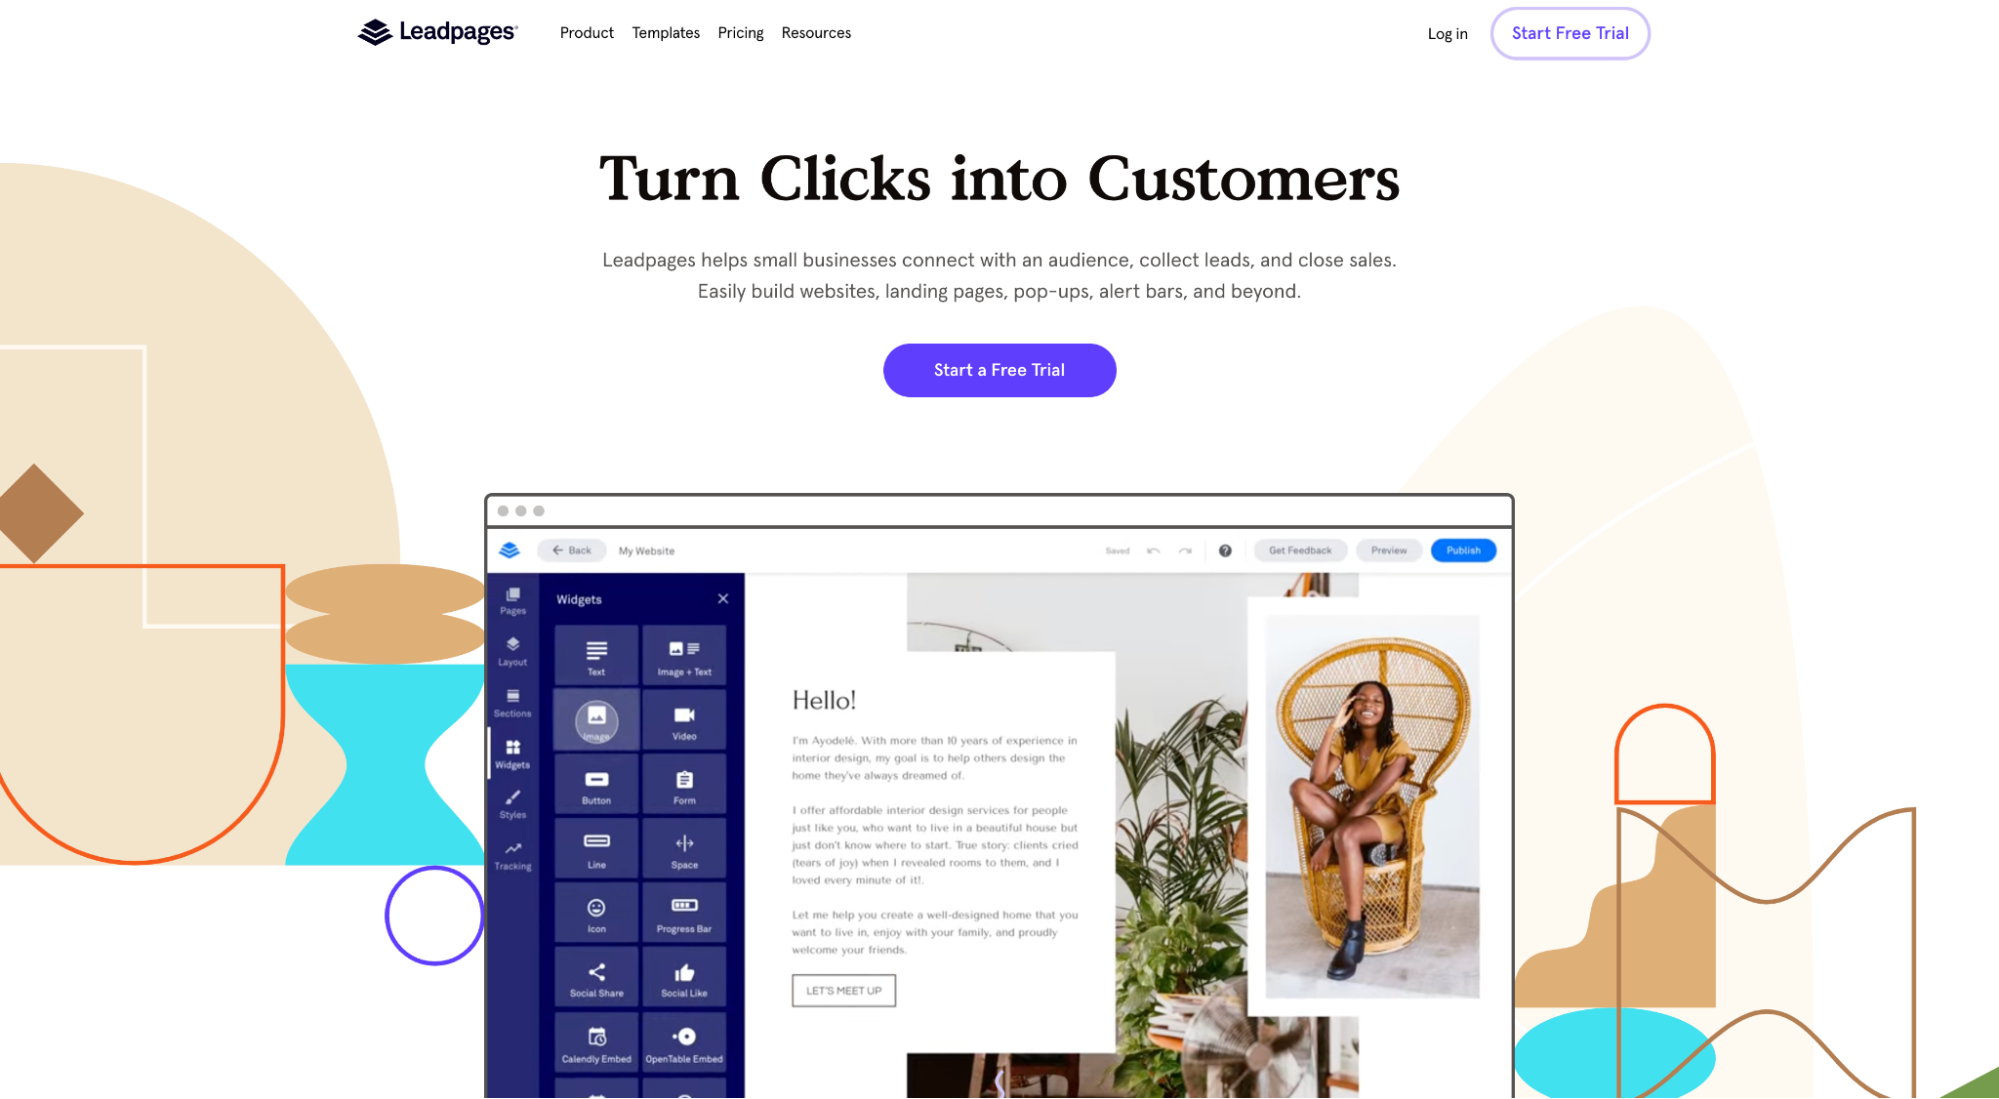 Leadpages’ homepage